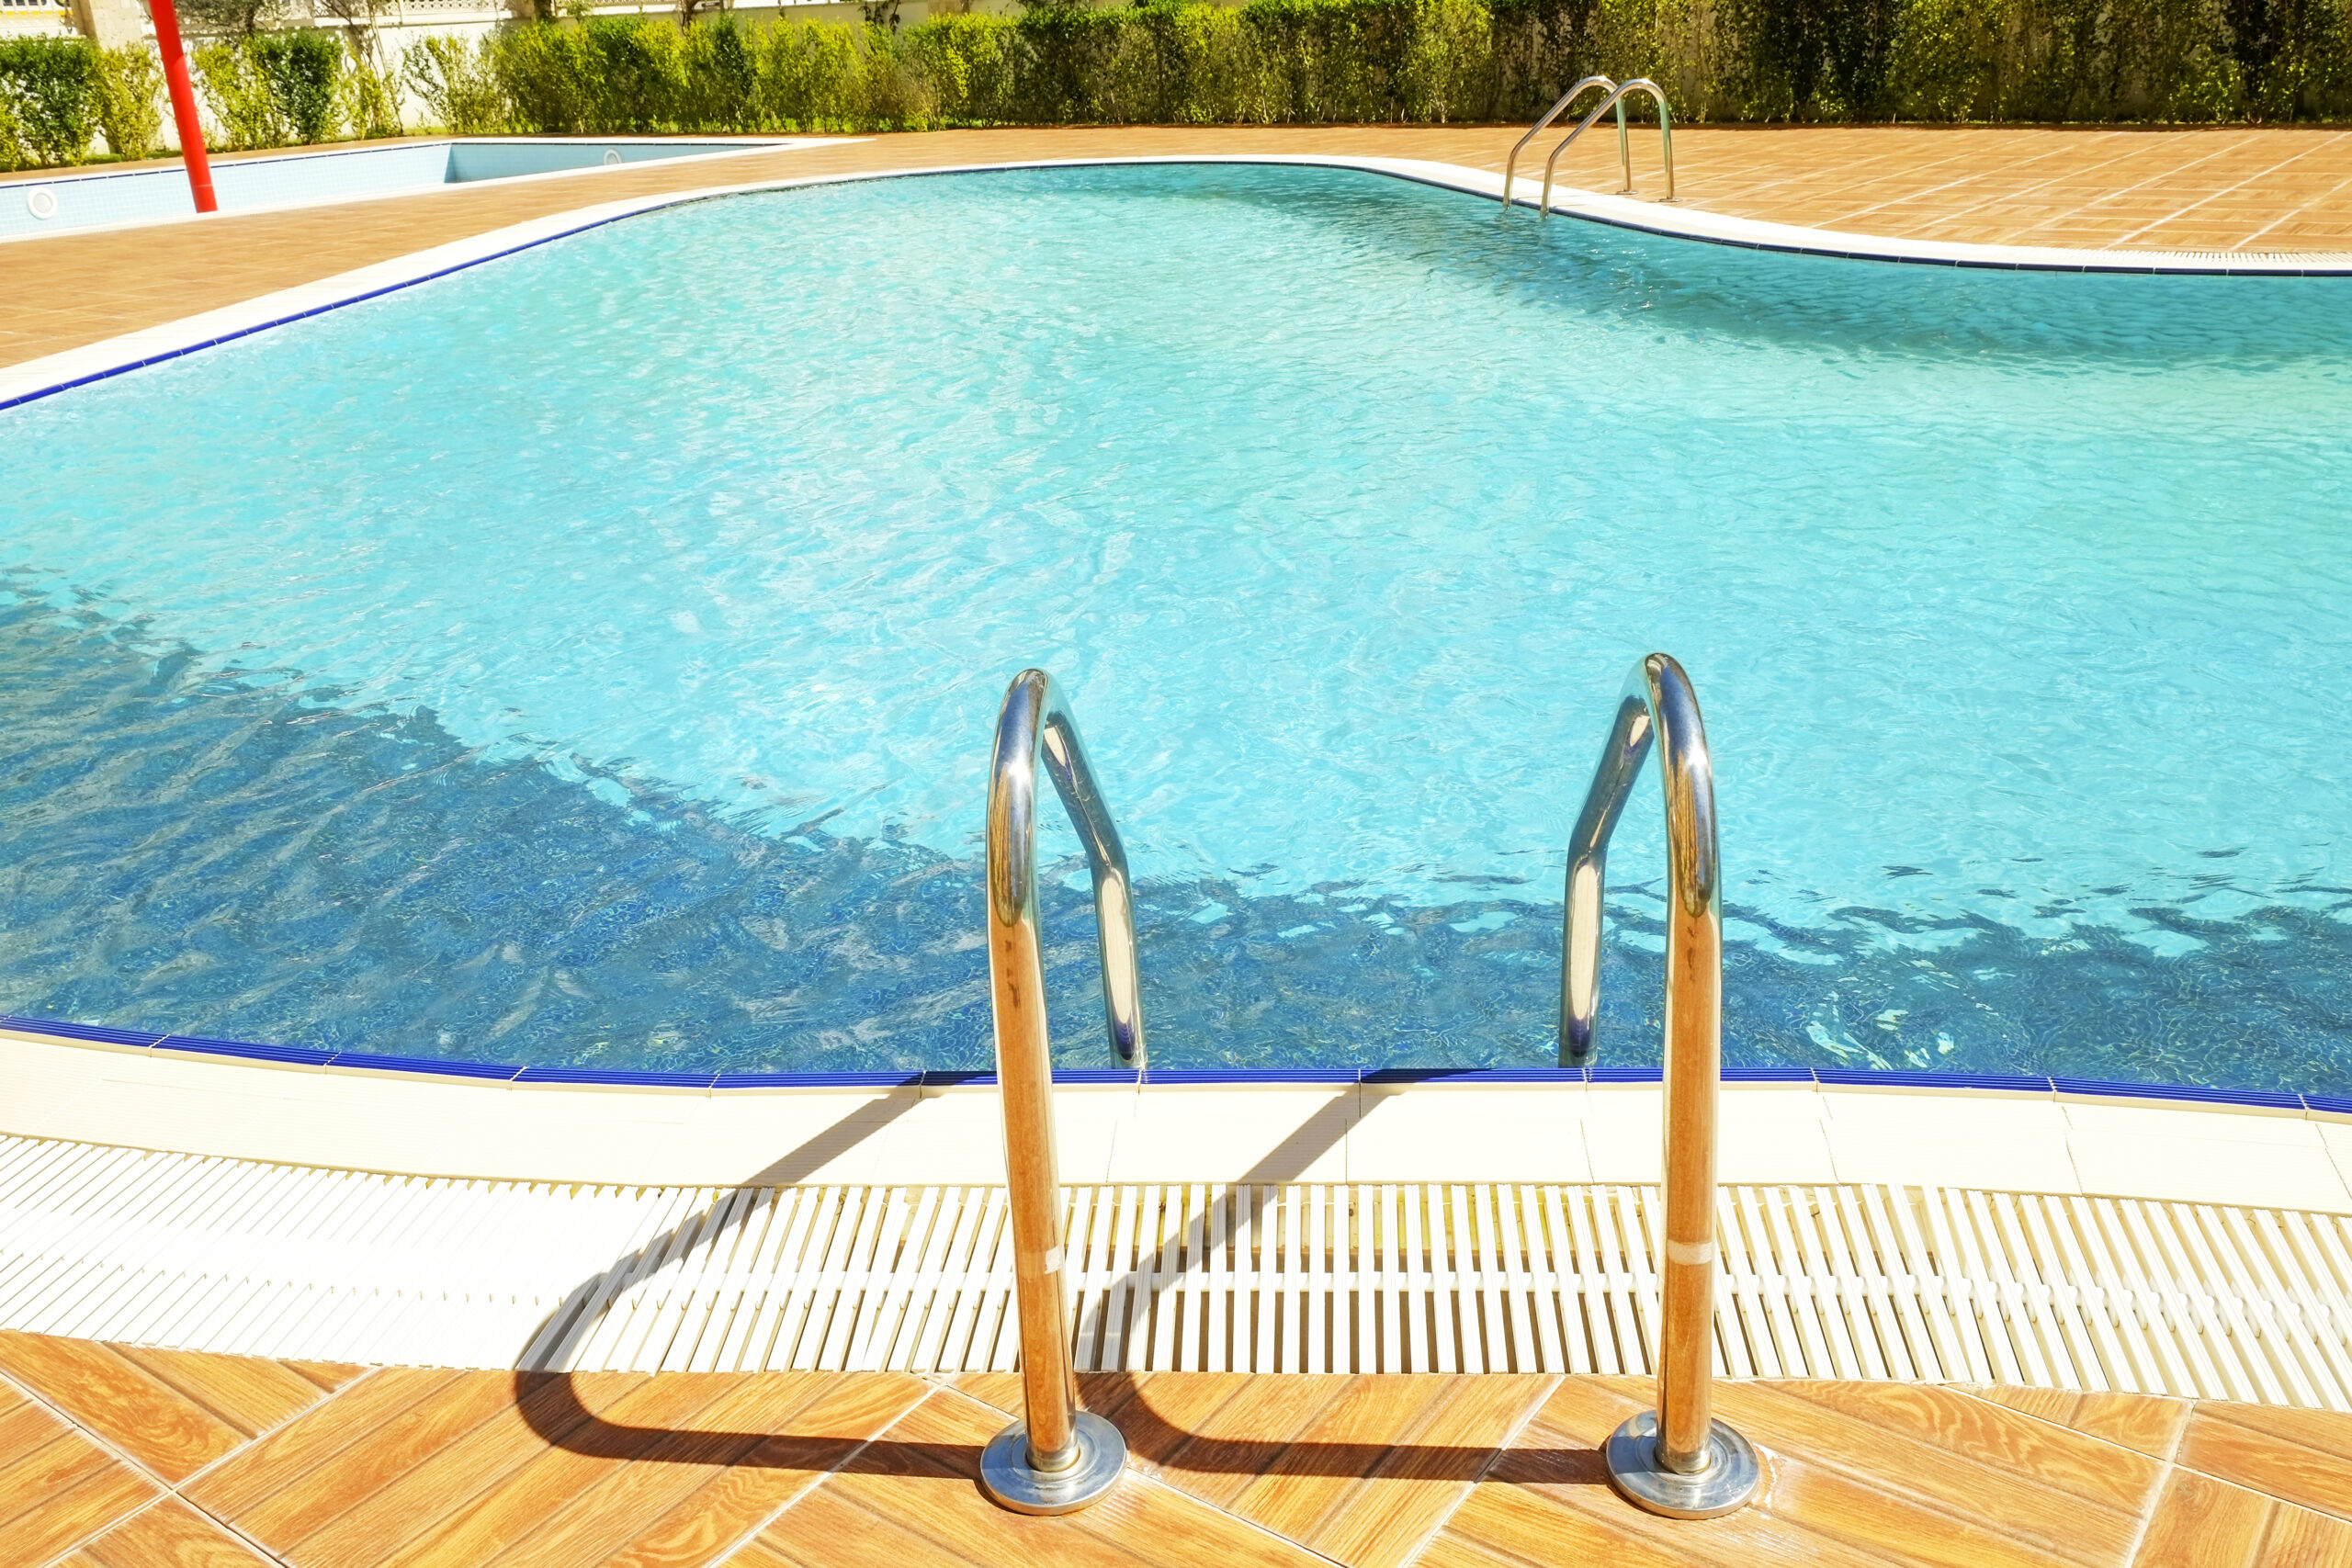 Channel drains surrounding a pool to efficiently manage water runoff and drainage